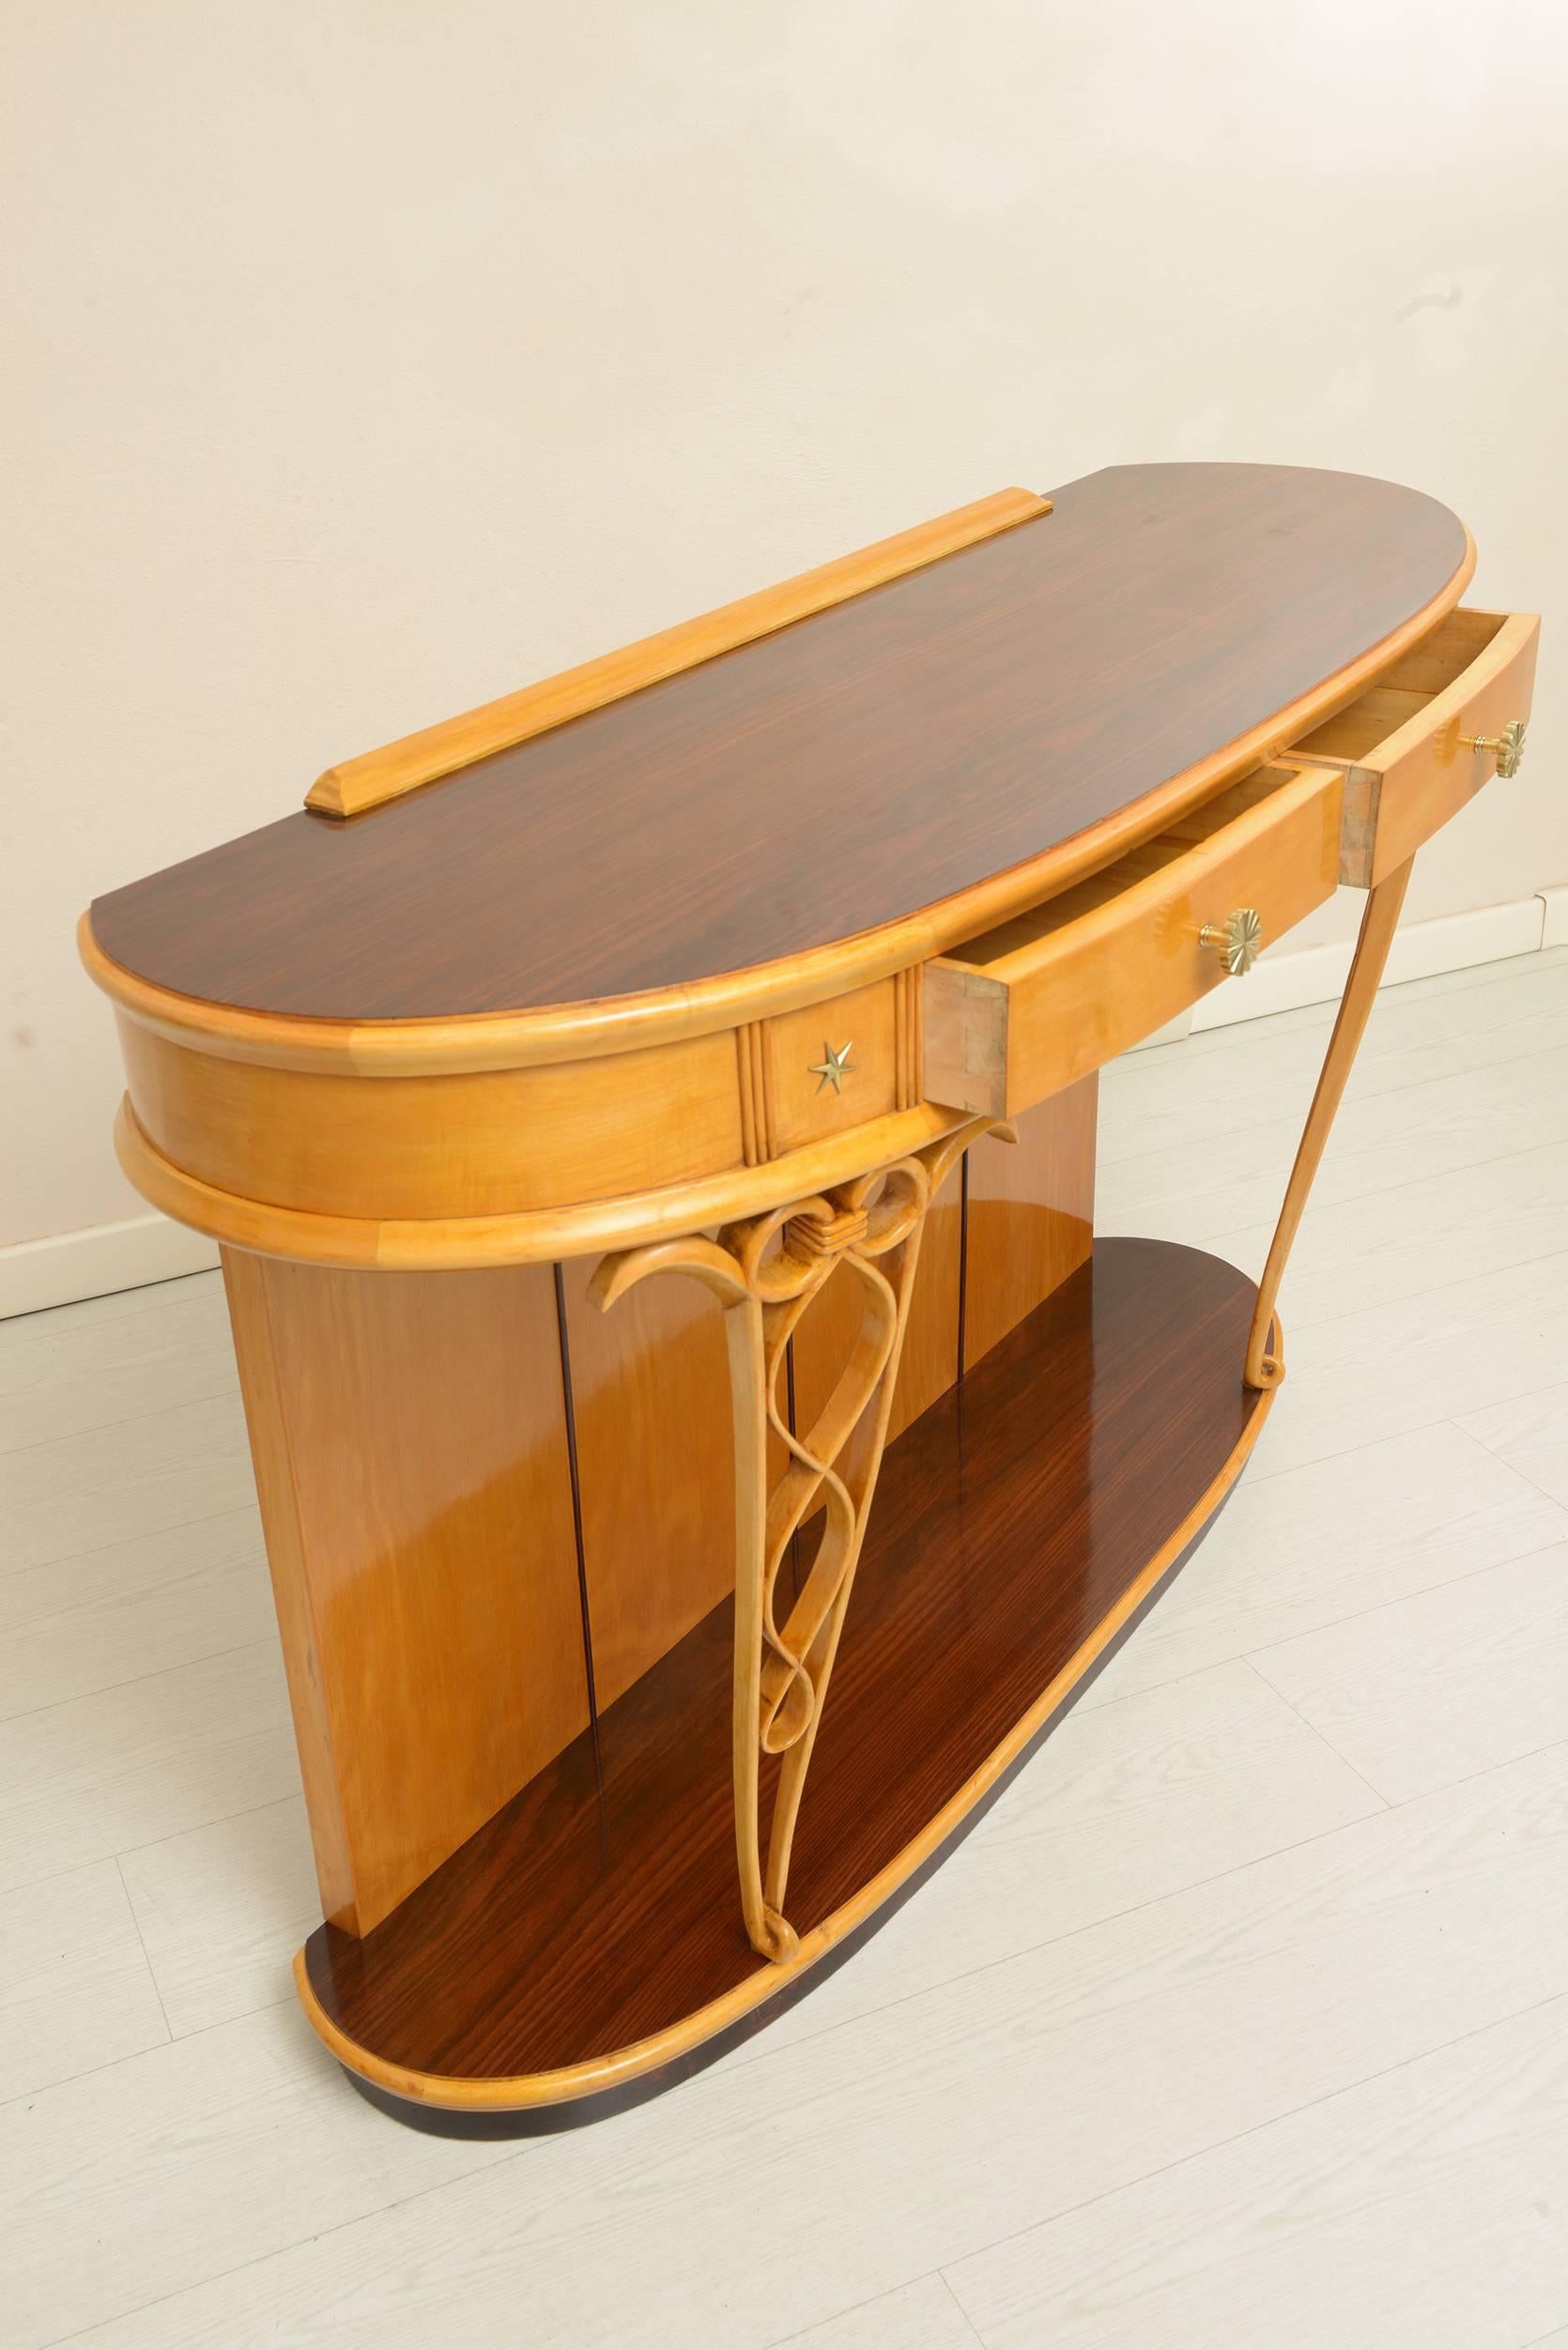 Brass Rounded Italian 1940s Console by Fagioli Firenze